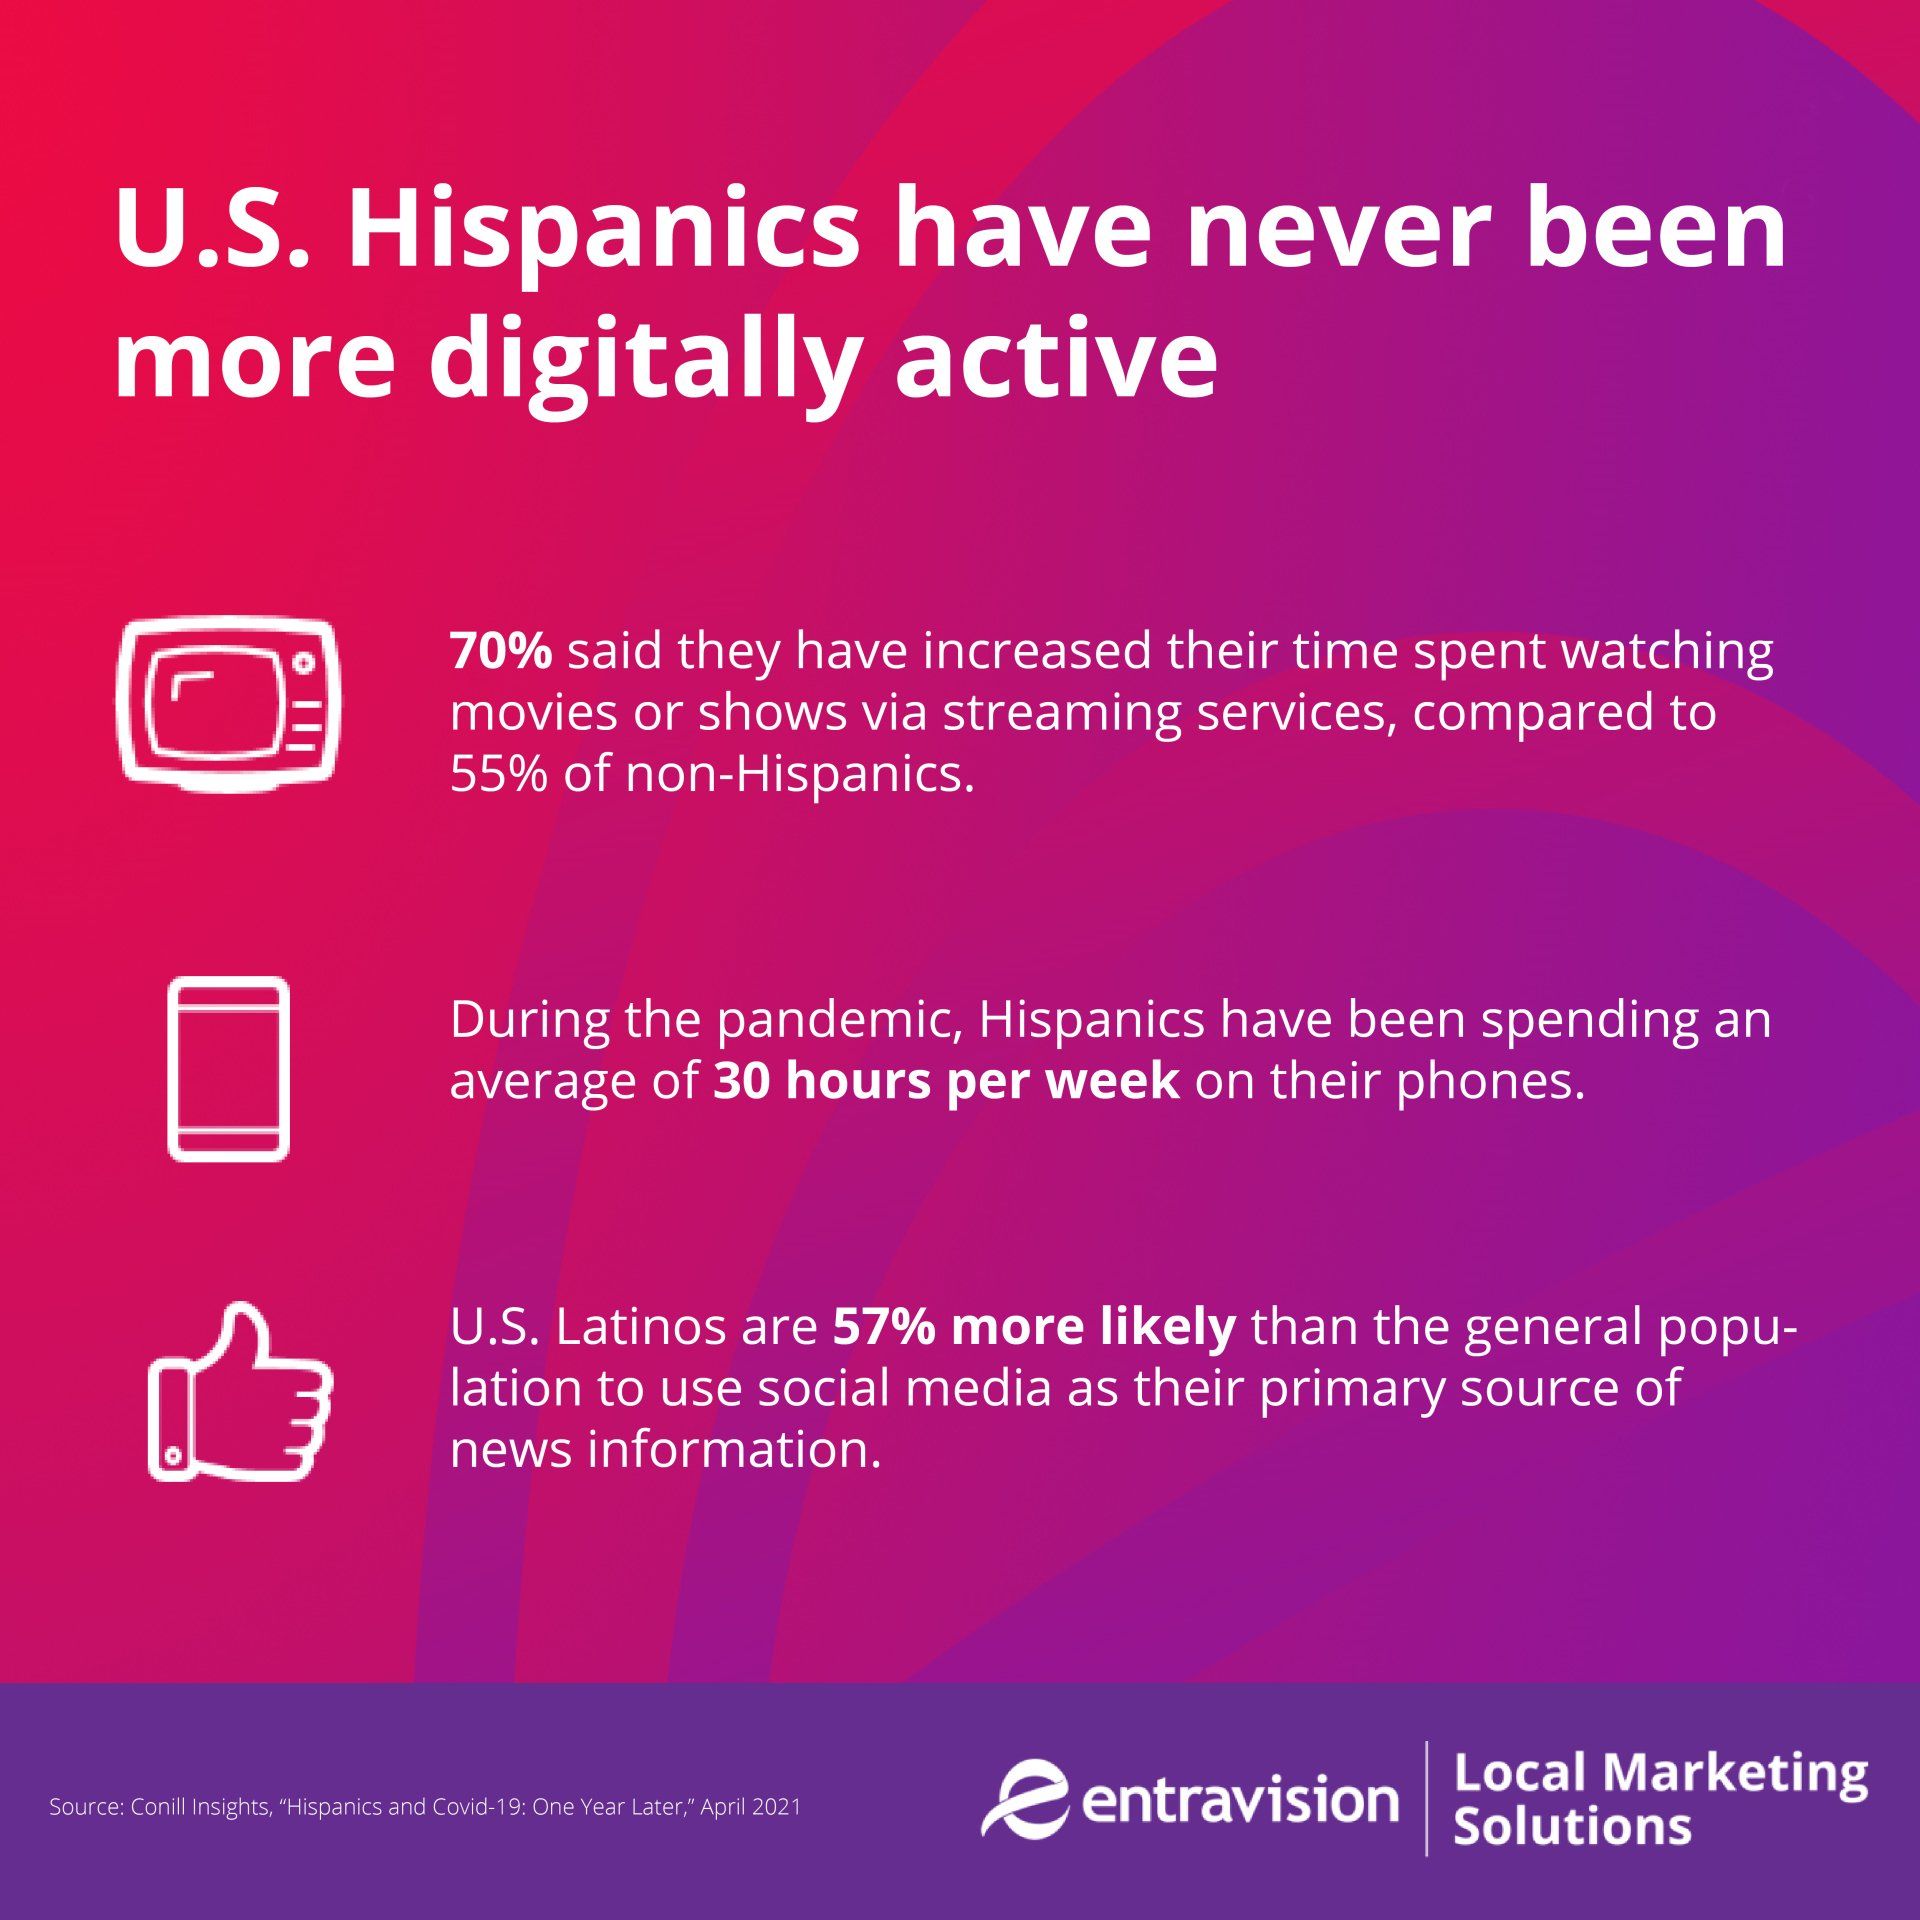 An Entravision infographic details how Hispanic audiences have never been as digitally active as they are now, making Hispanic marketing a perfect way to connect with them.